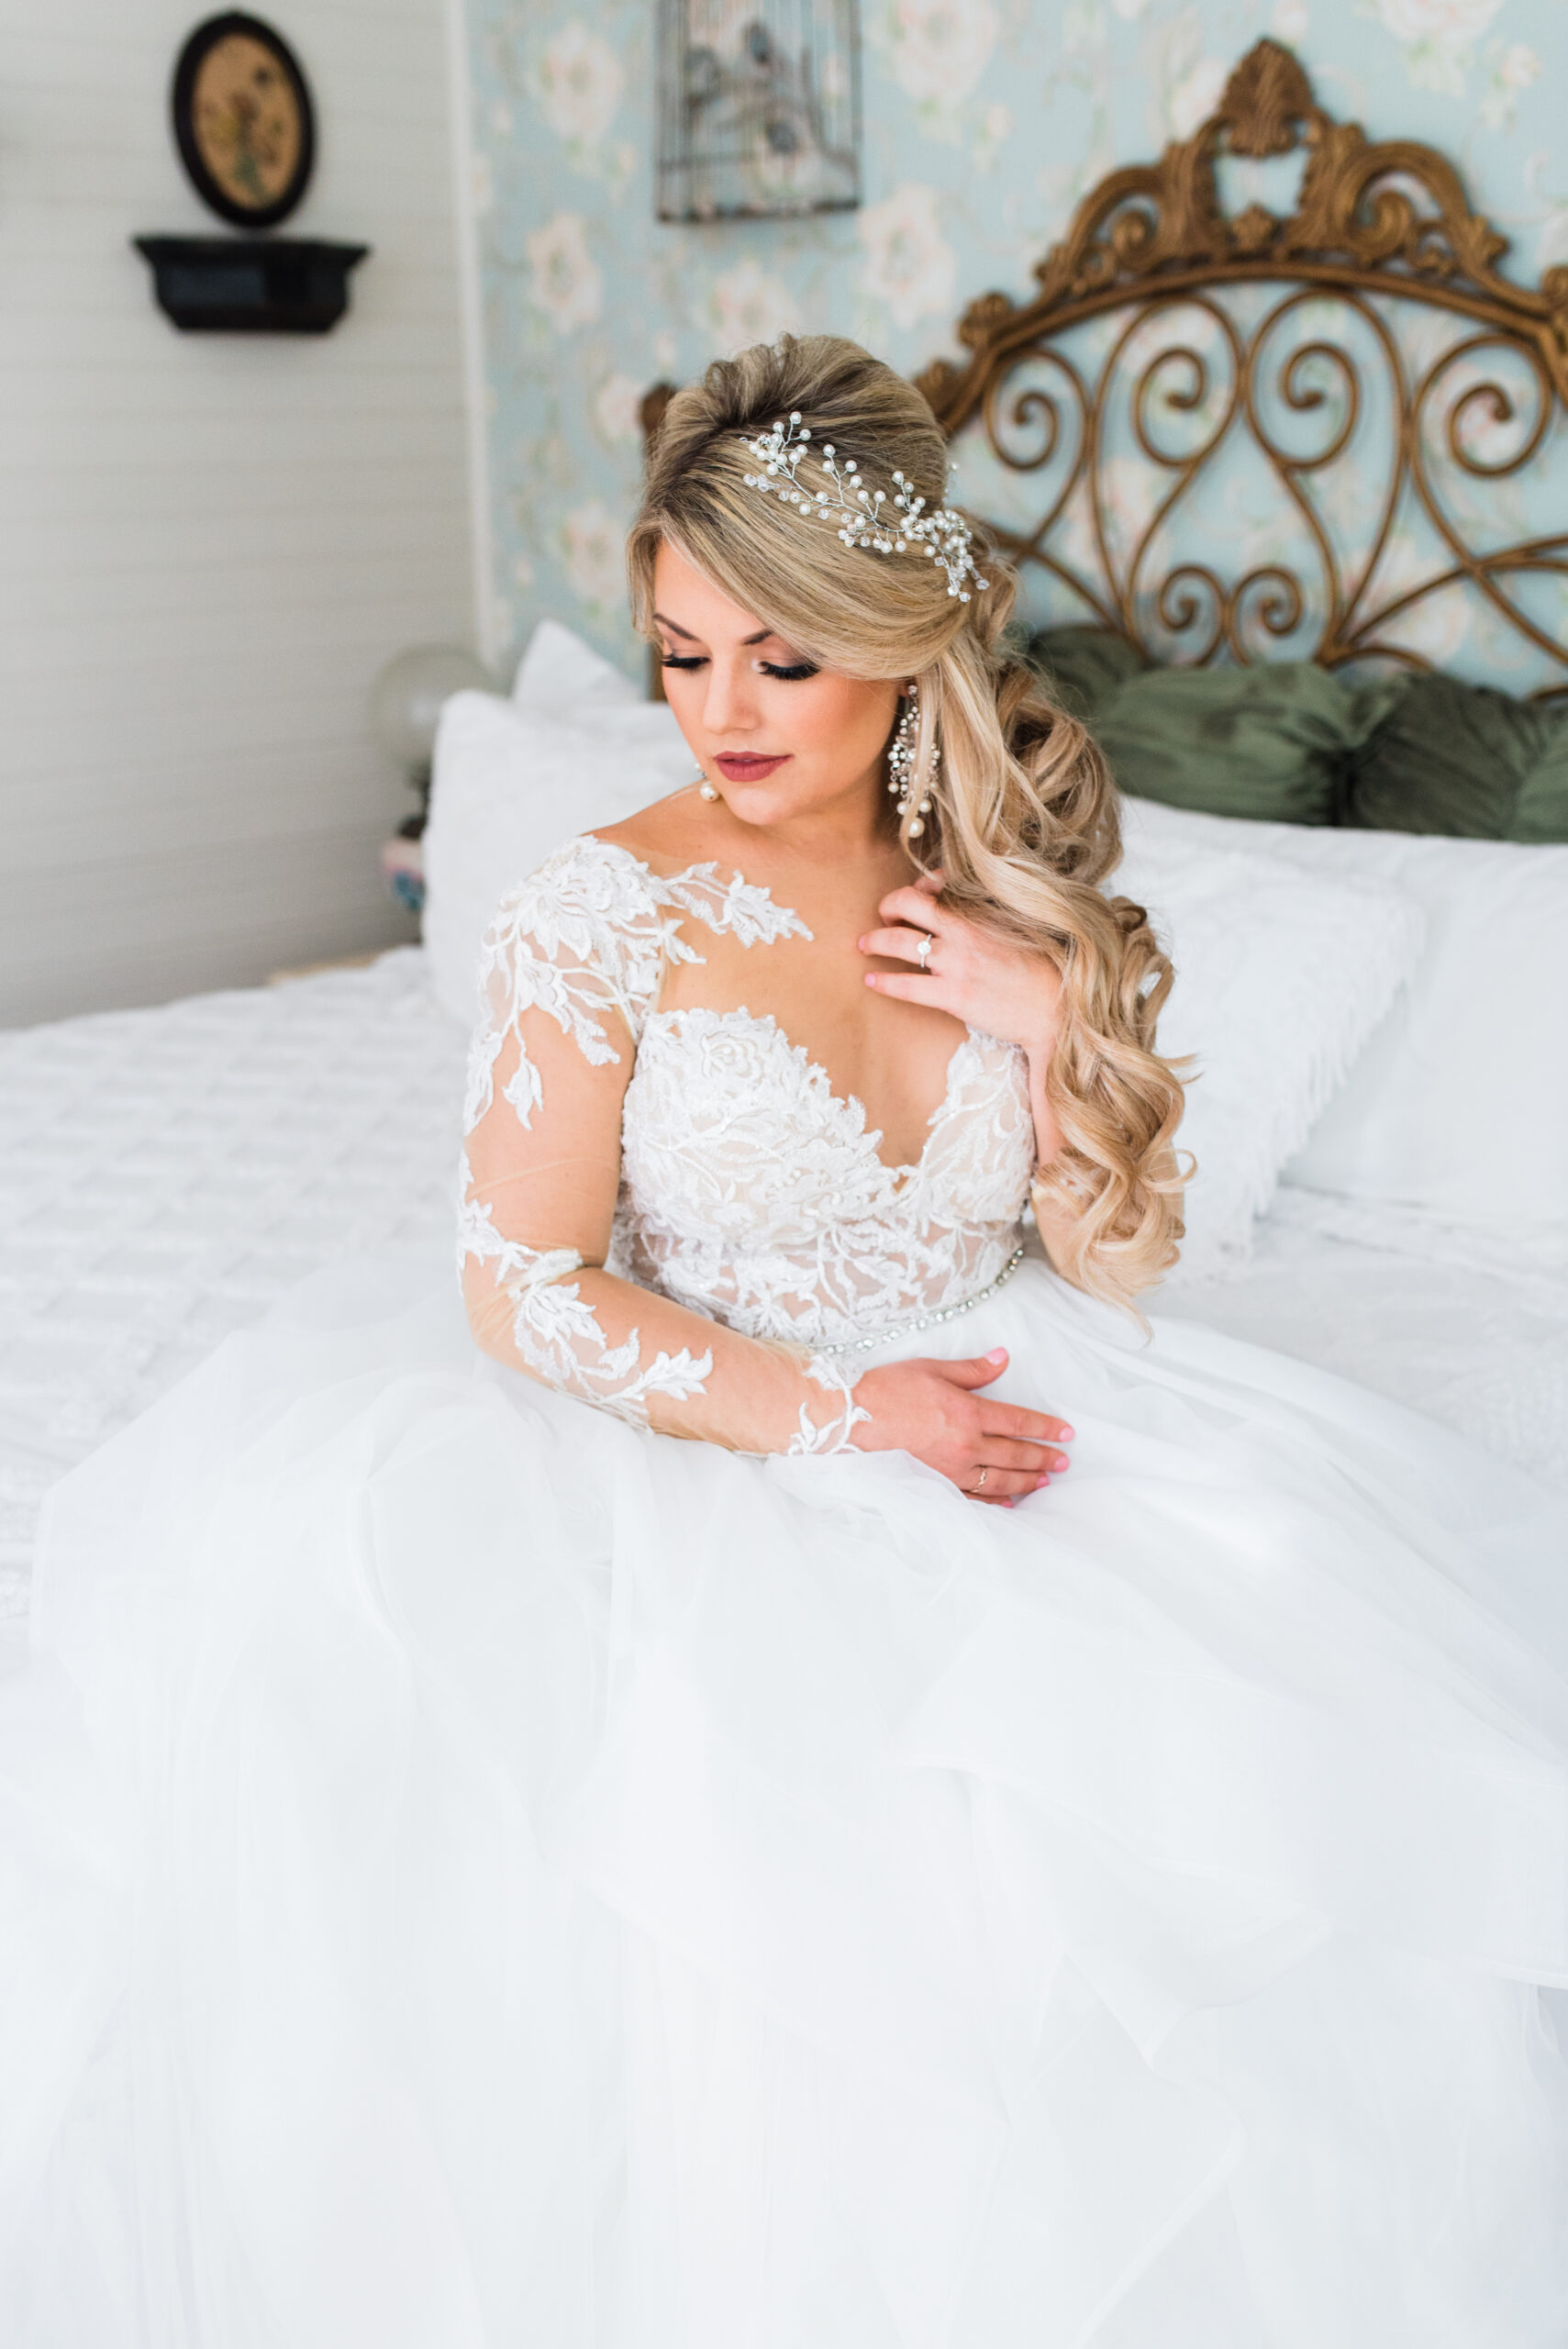 Bride with luxurious makeup and hair, wearing a tiara by Kristy's Artistry Design Team